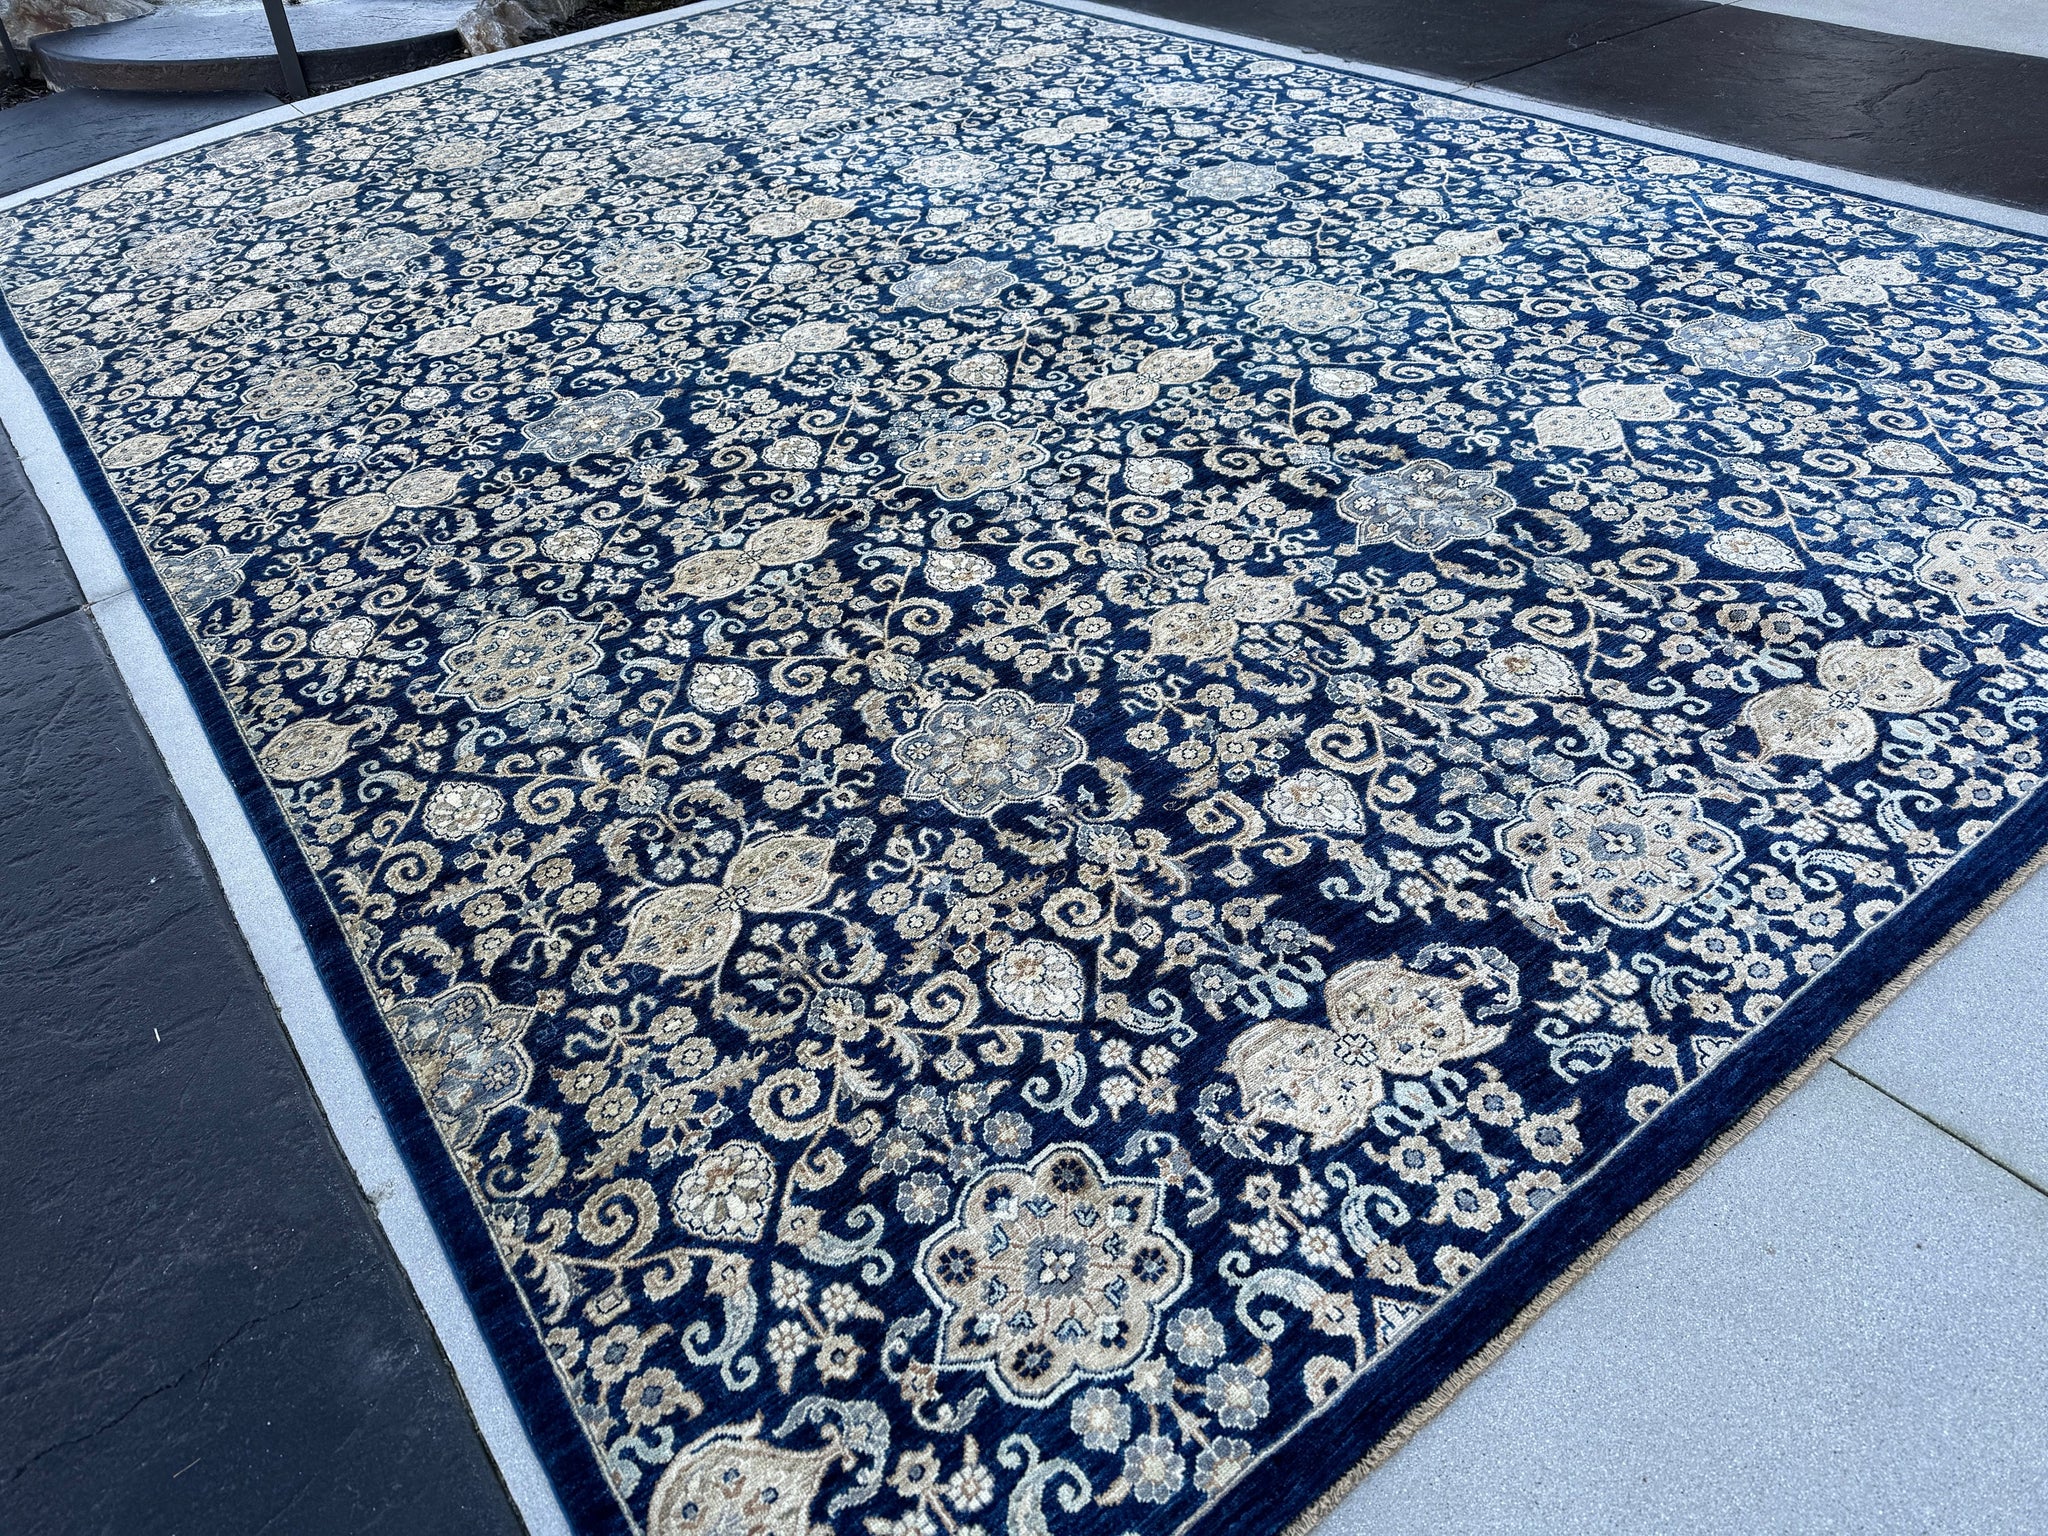 11x17 (213x518) Handmade Afghan Rug | Navy Powder Sky Blue Cream Beige White | Wool Hand Knotted Floral